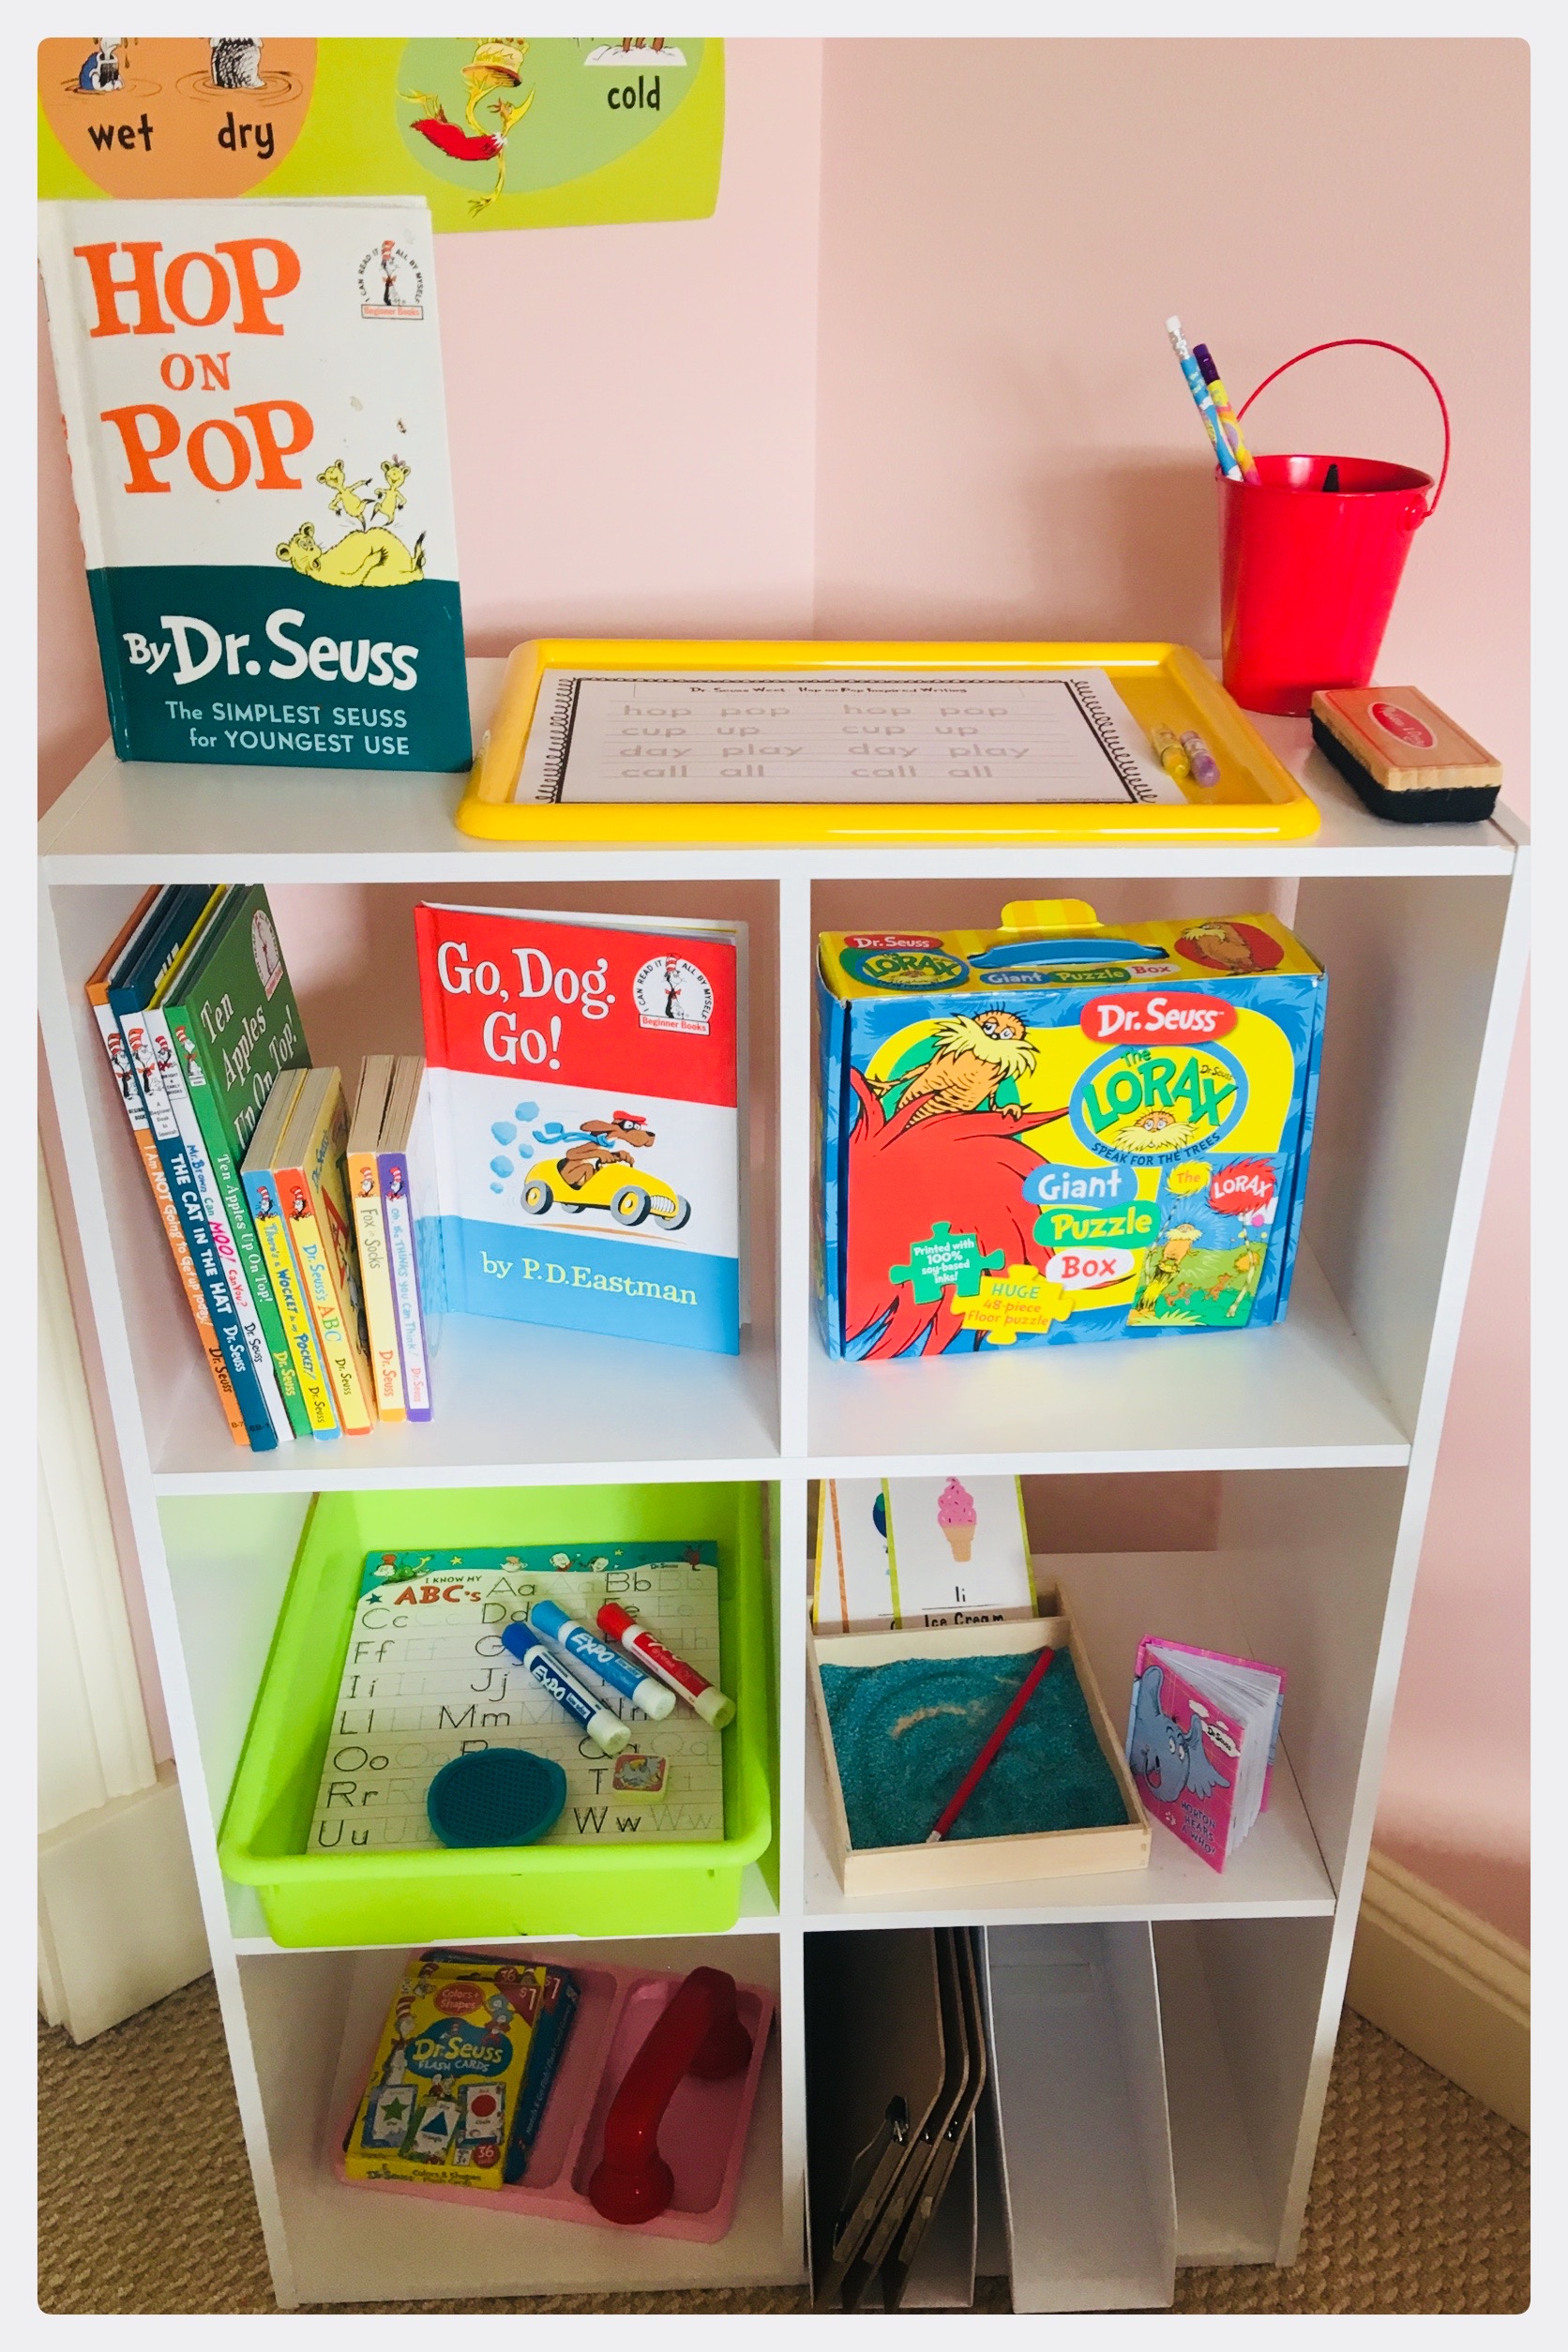 💙 The Cat In The Hat Sensory Bin ❤️ With Dr. Seuss’s Birthday just around the corner and Read Across America Day quickly approaching, I thought I’d share some of our favorite Dr. Seuss Inspired play! 💙 Sensory bins, Cat in the Hat hats, name tags, playroom decor, and this literacy center set-up